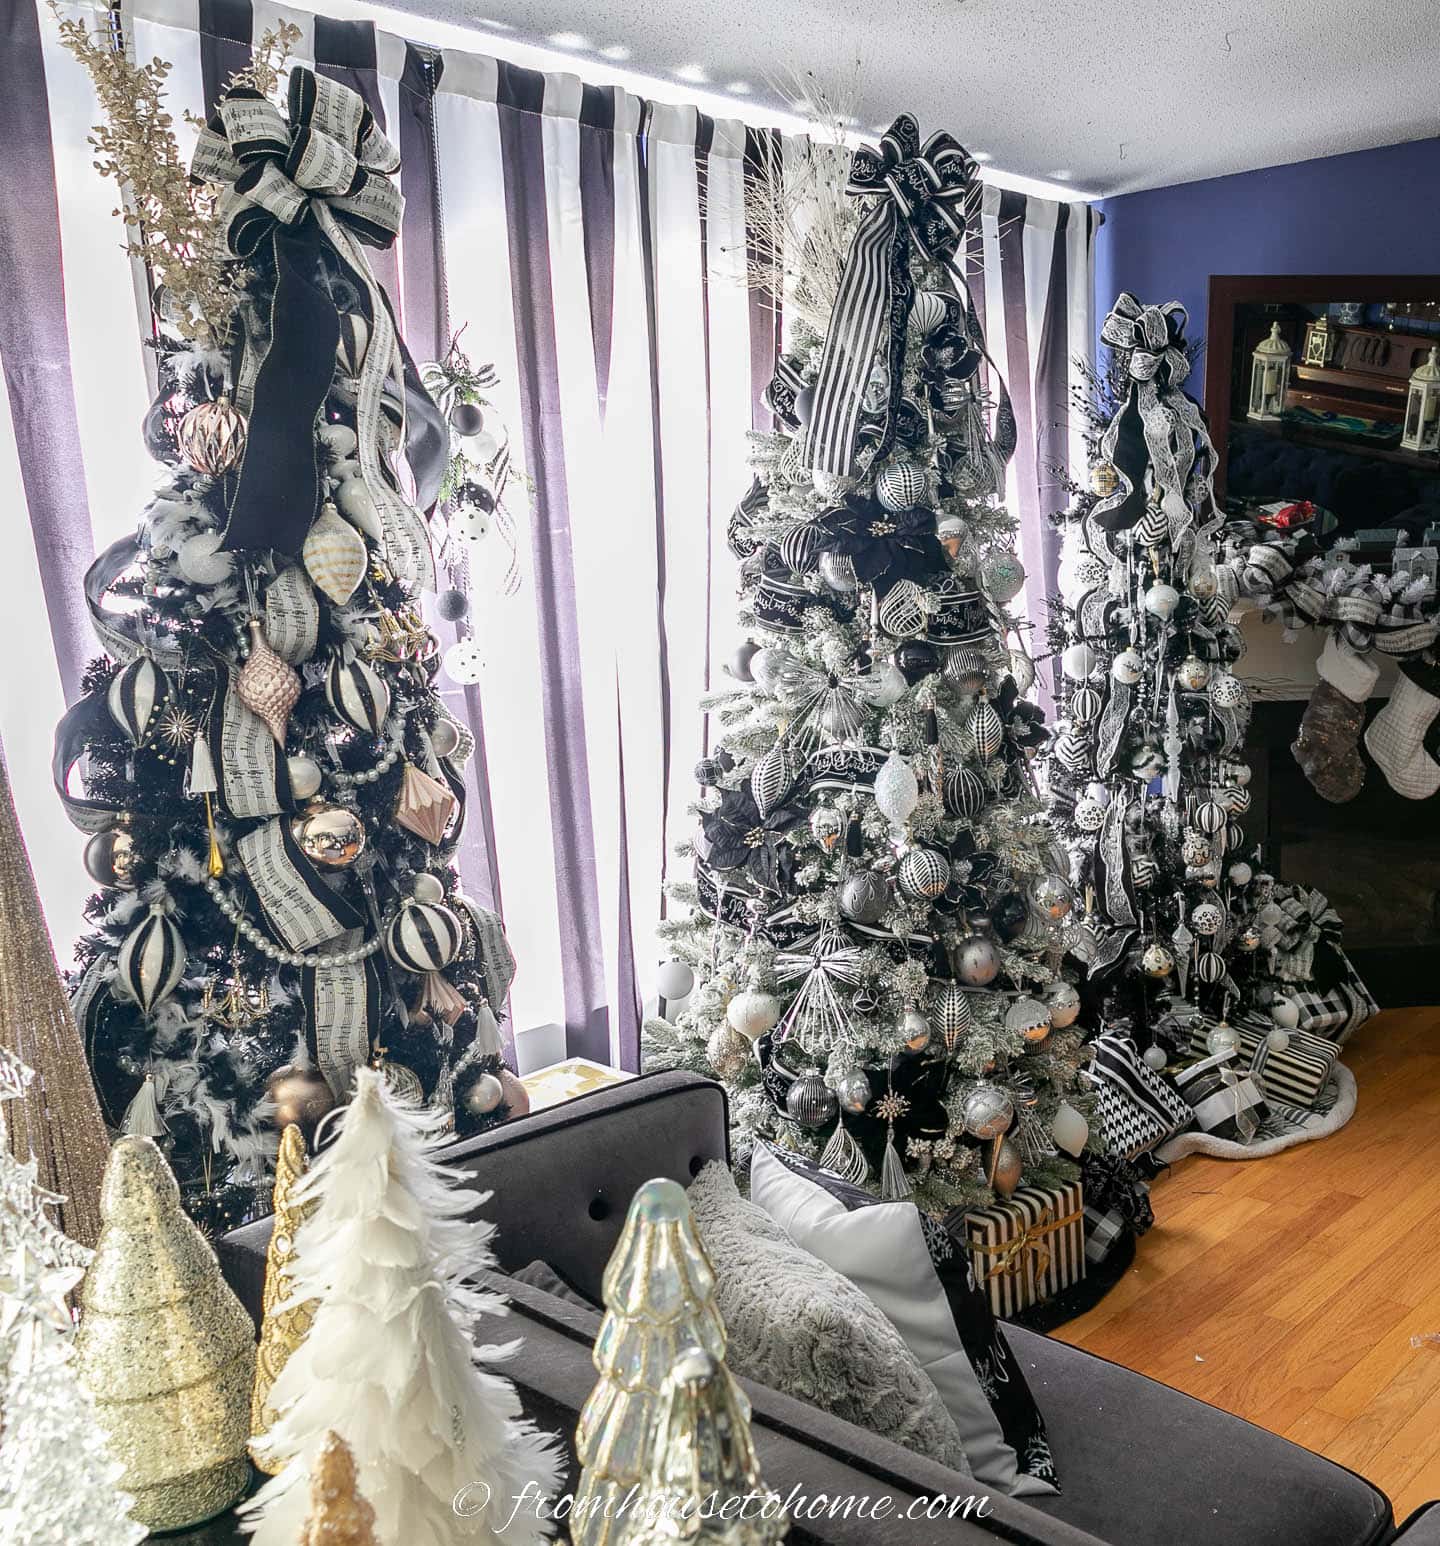 Three black and white Christmas trees in front of black and white striped curtains